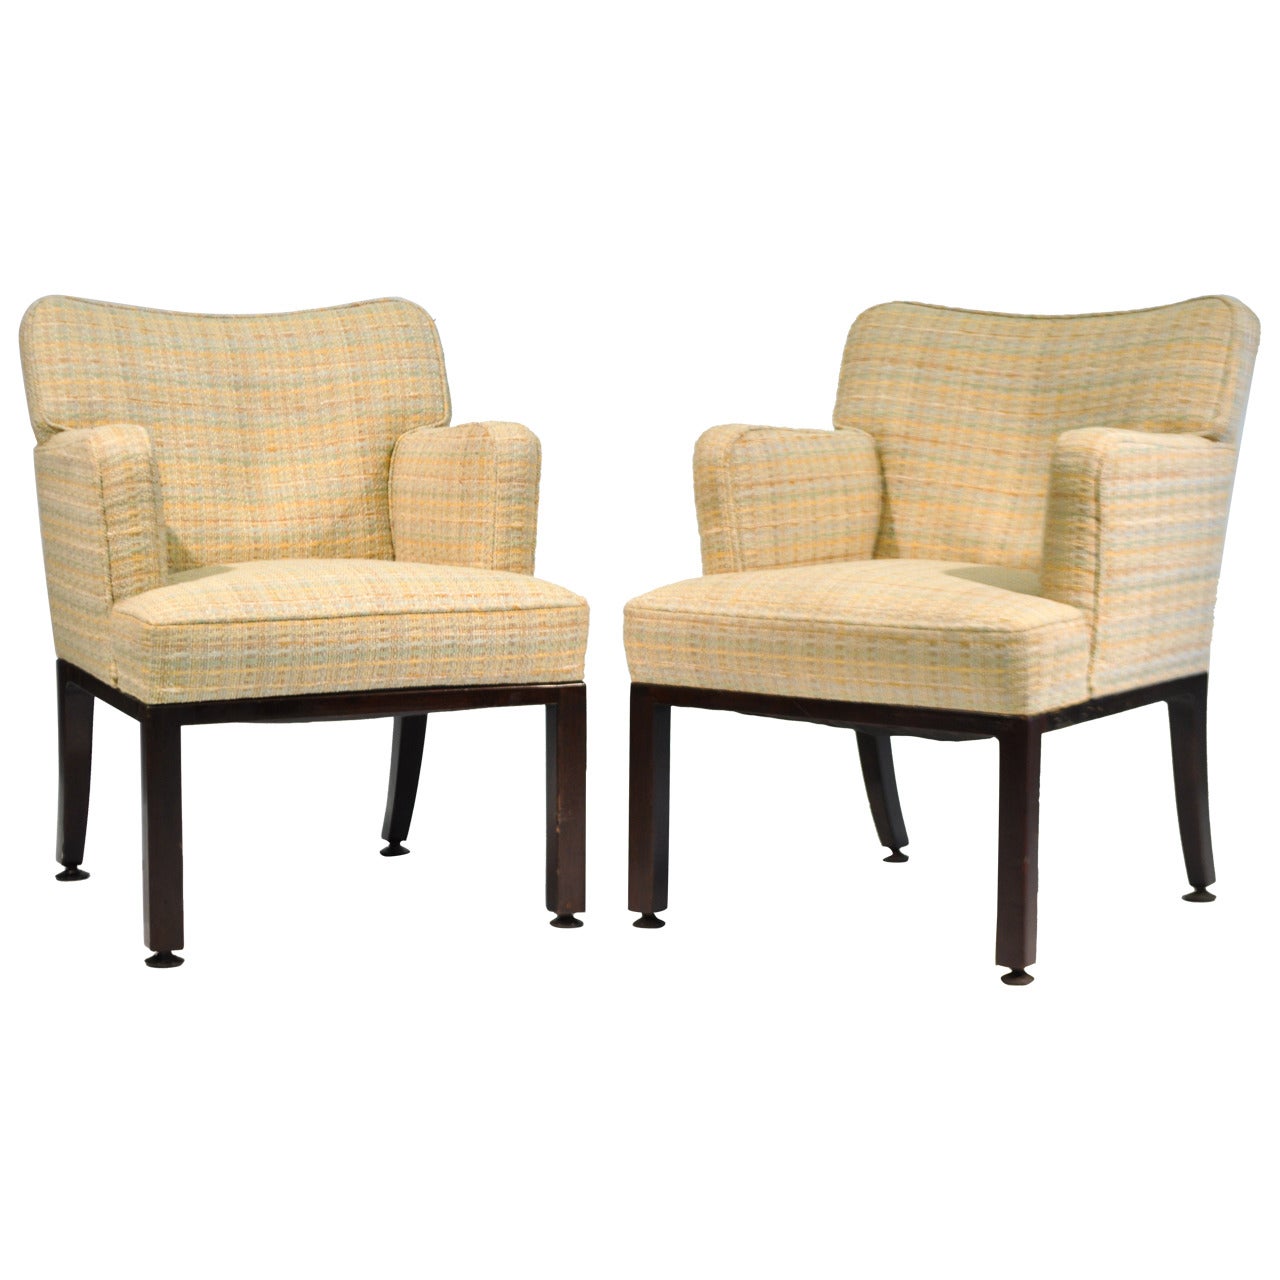 Pair of Edward Wormley Upholstered Armchairs For Sale